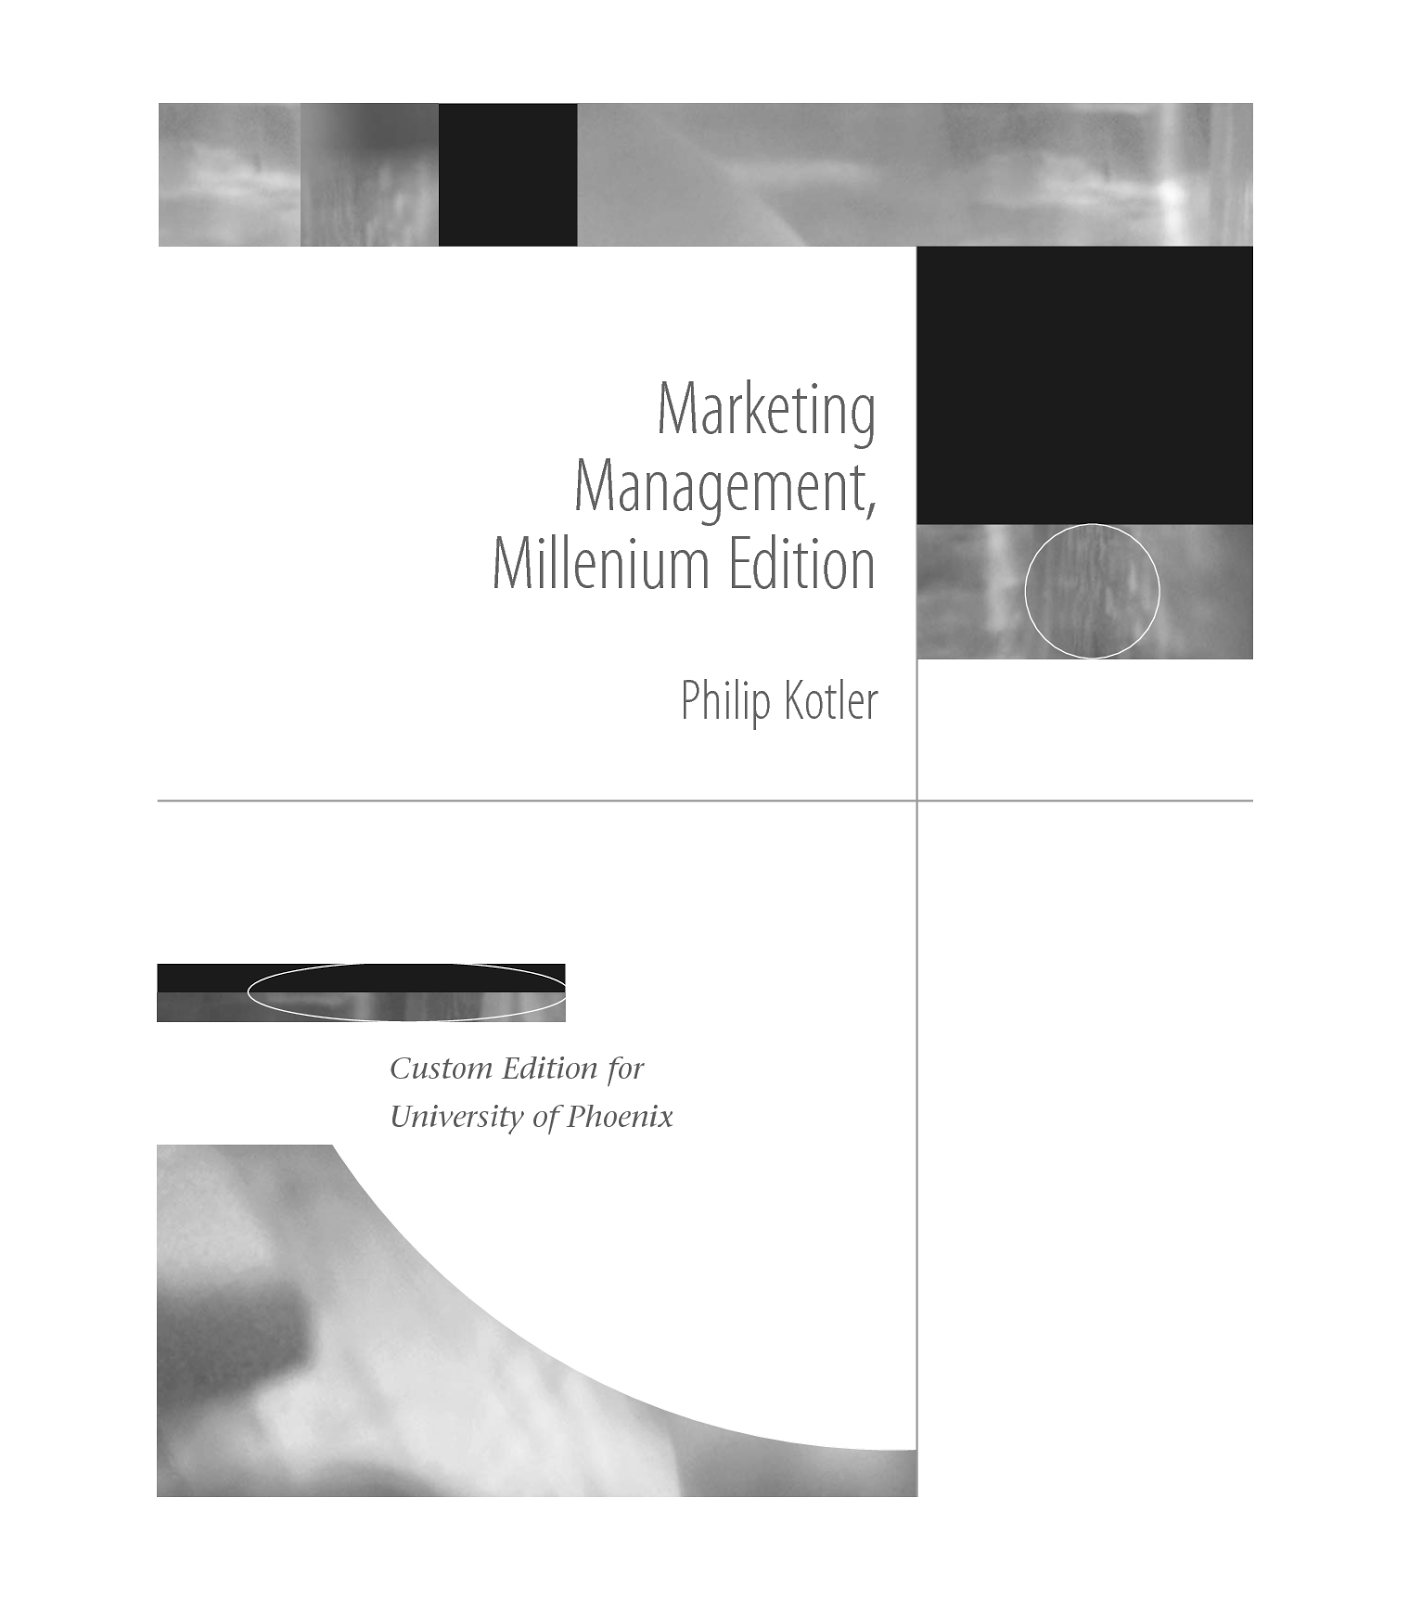 Marketing Management By Philip Kotler 14тh Edition Pdf Free Download